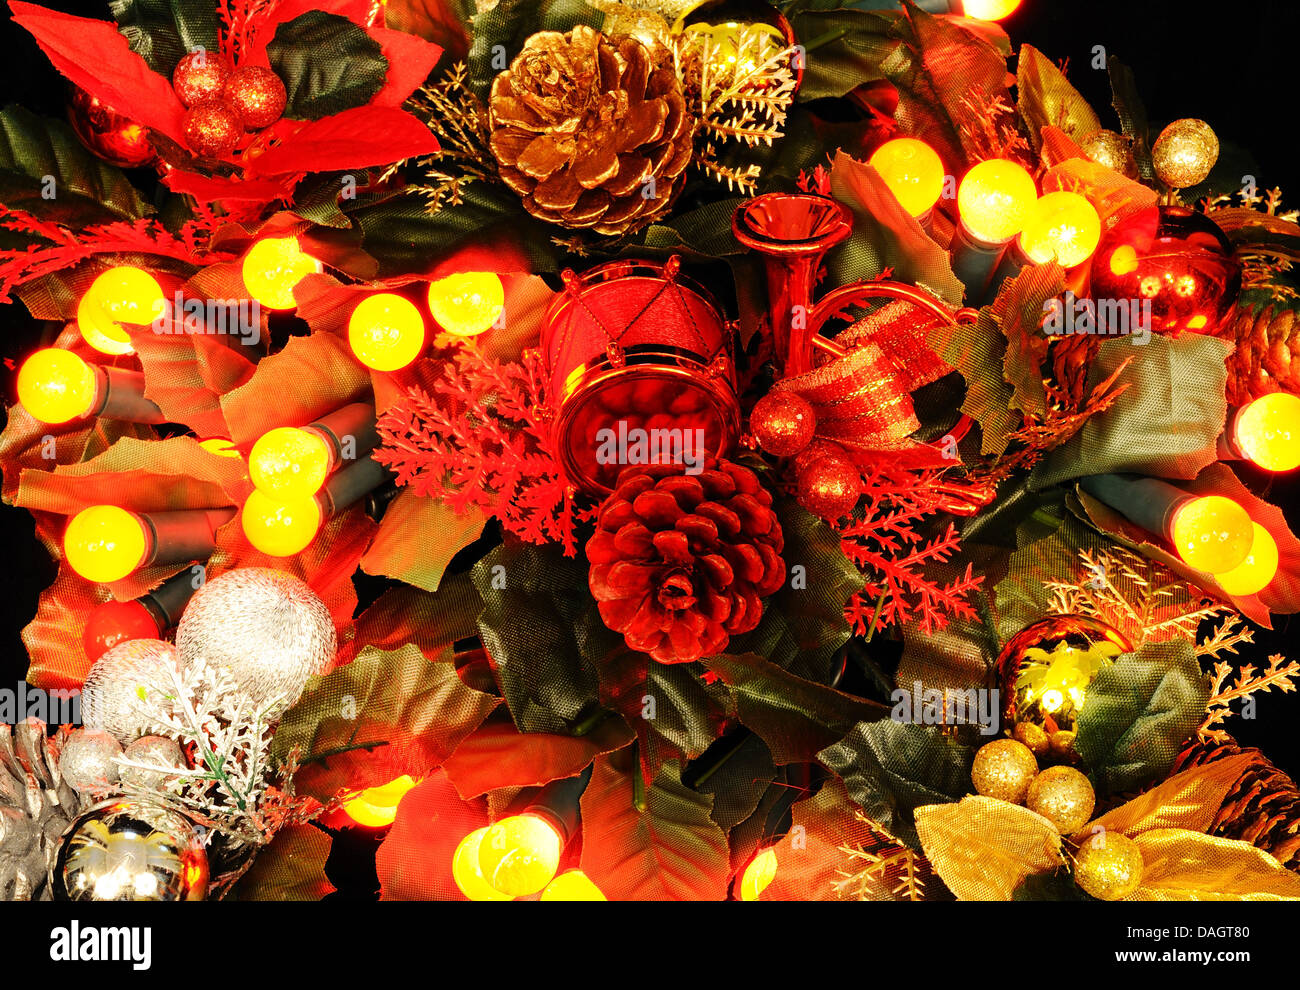 Christmas flowers and red berry lights. Stock Photo